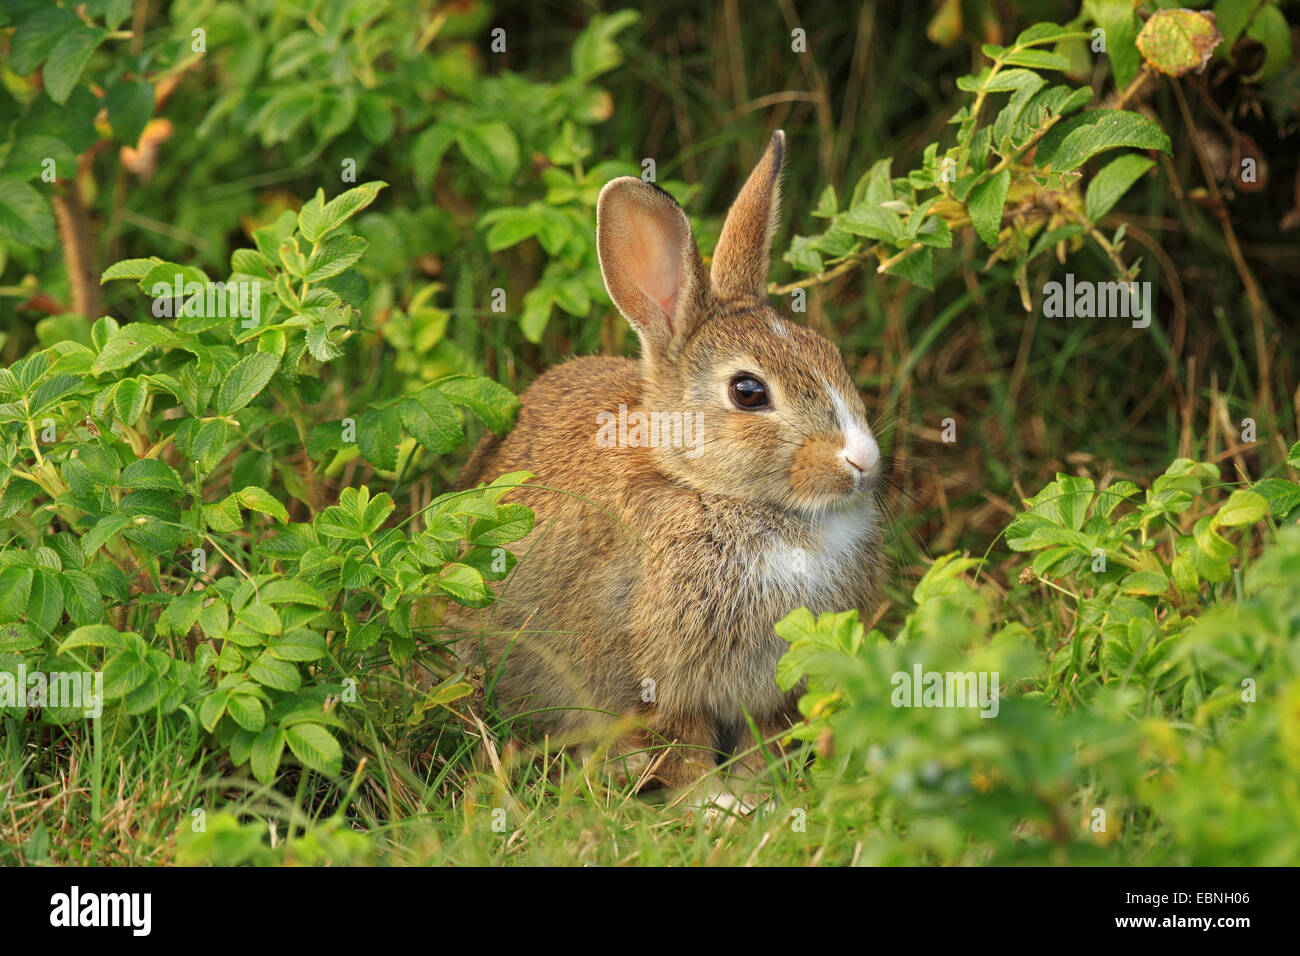 European rabbit (Oryctolagus cuniculus), in front of wild rose, Germany, Schleswig-Holstein, Sylt Stock Photo